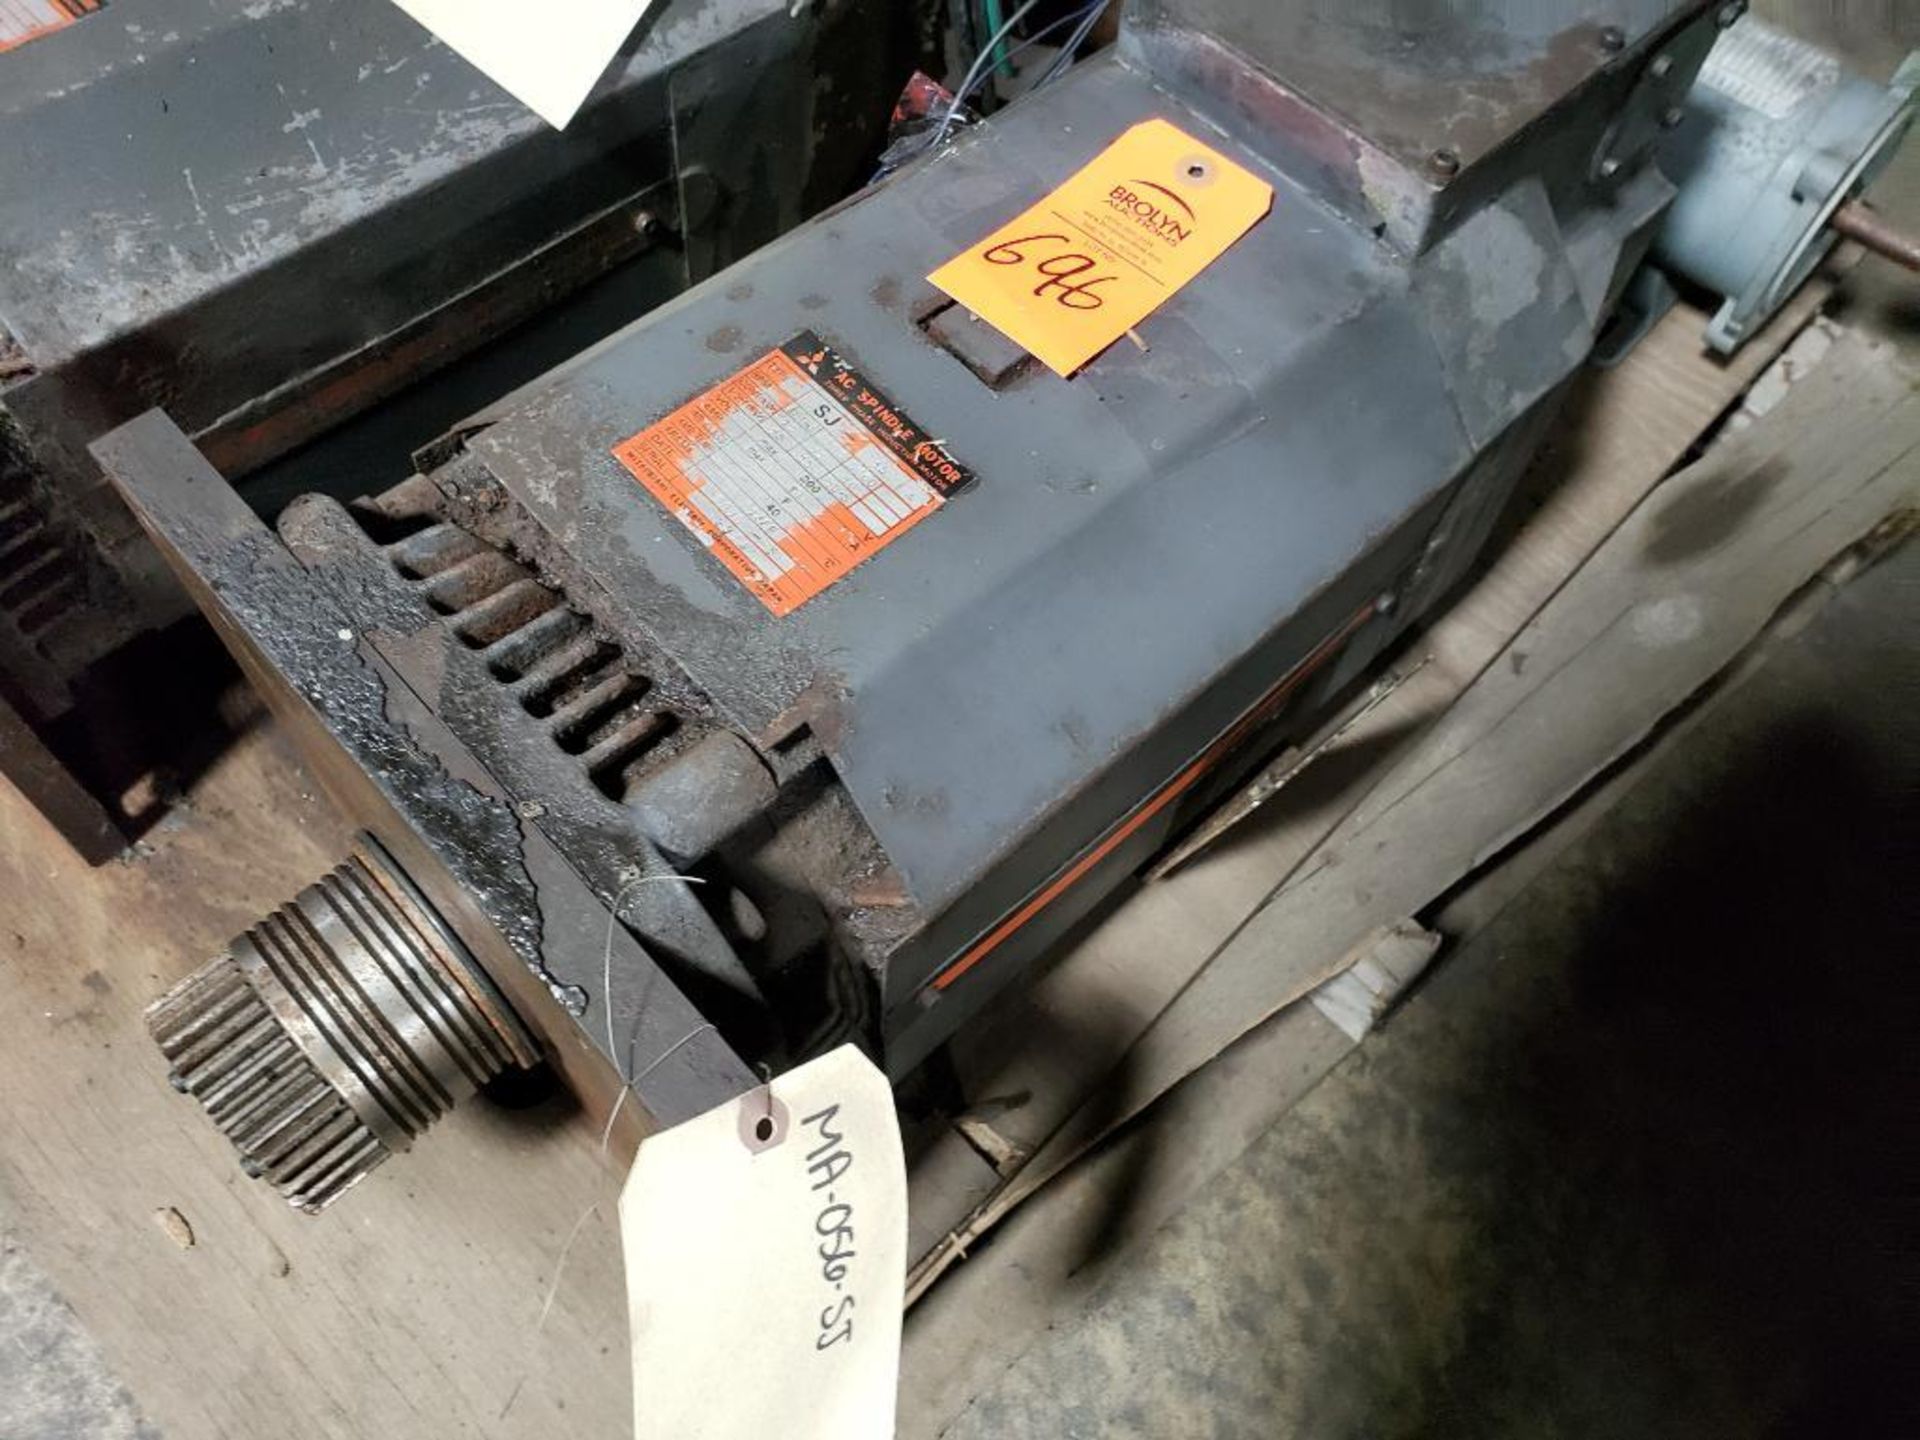 15kw Mitsubishi Electric AC spindle motor induction SJ-15A. 3PH, 200V, 5000RPM, 8132F-Frame.